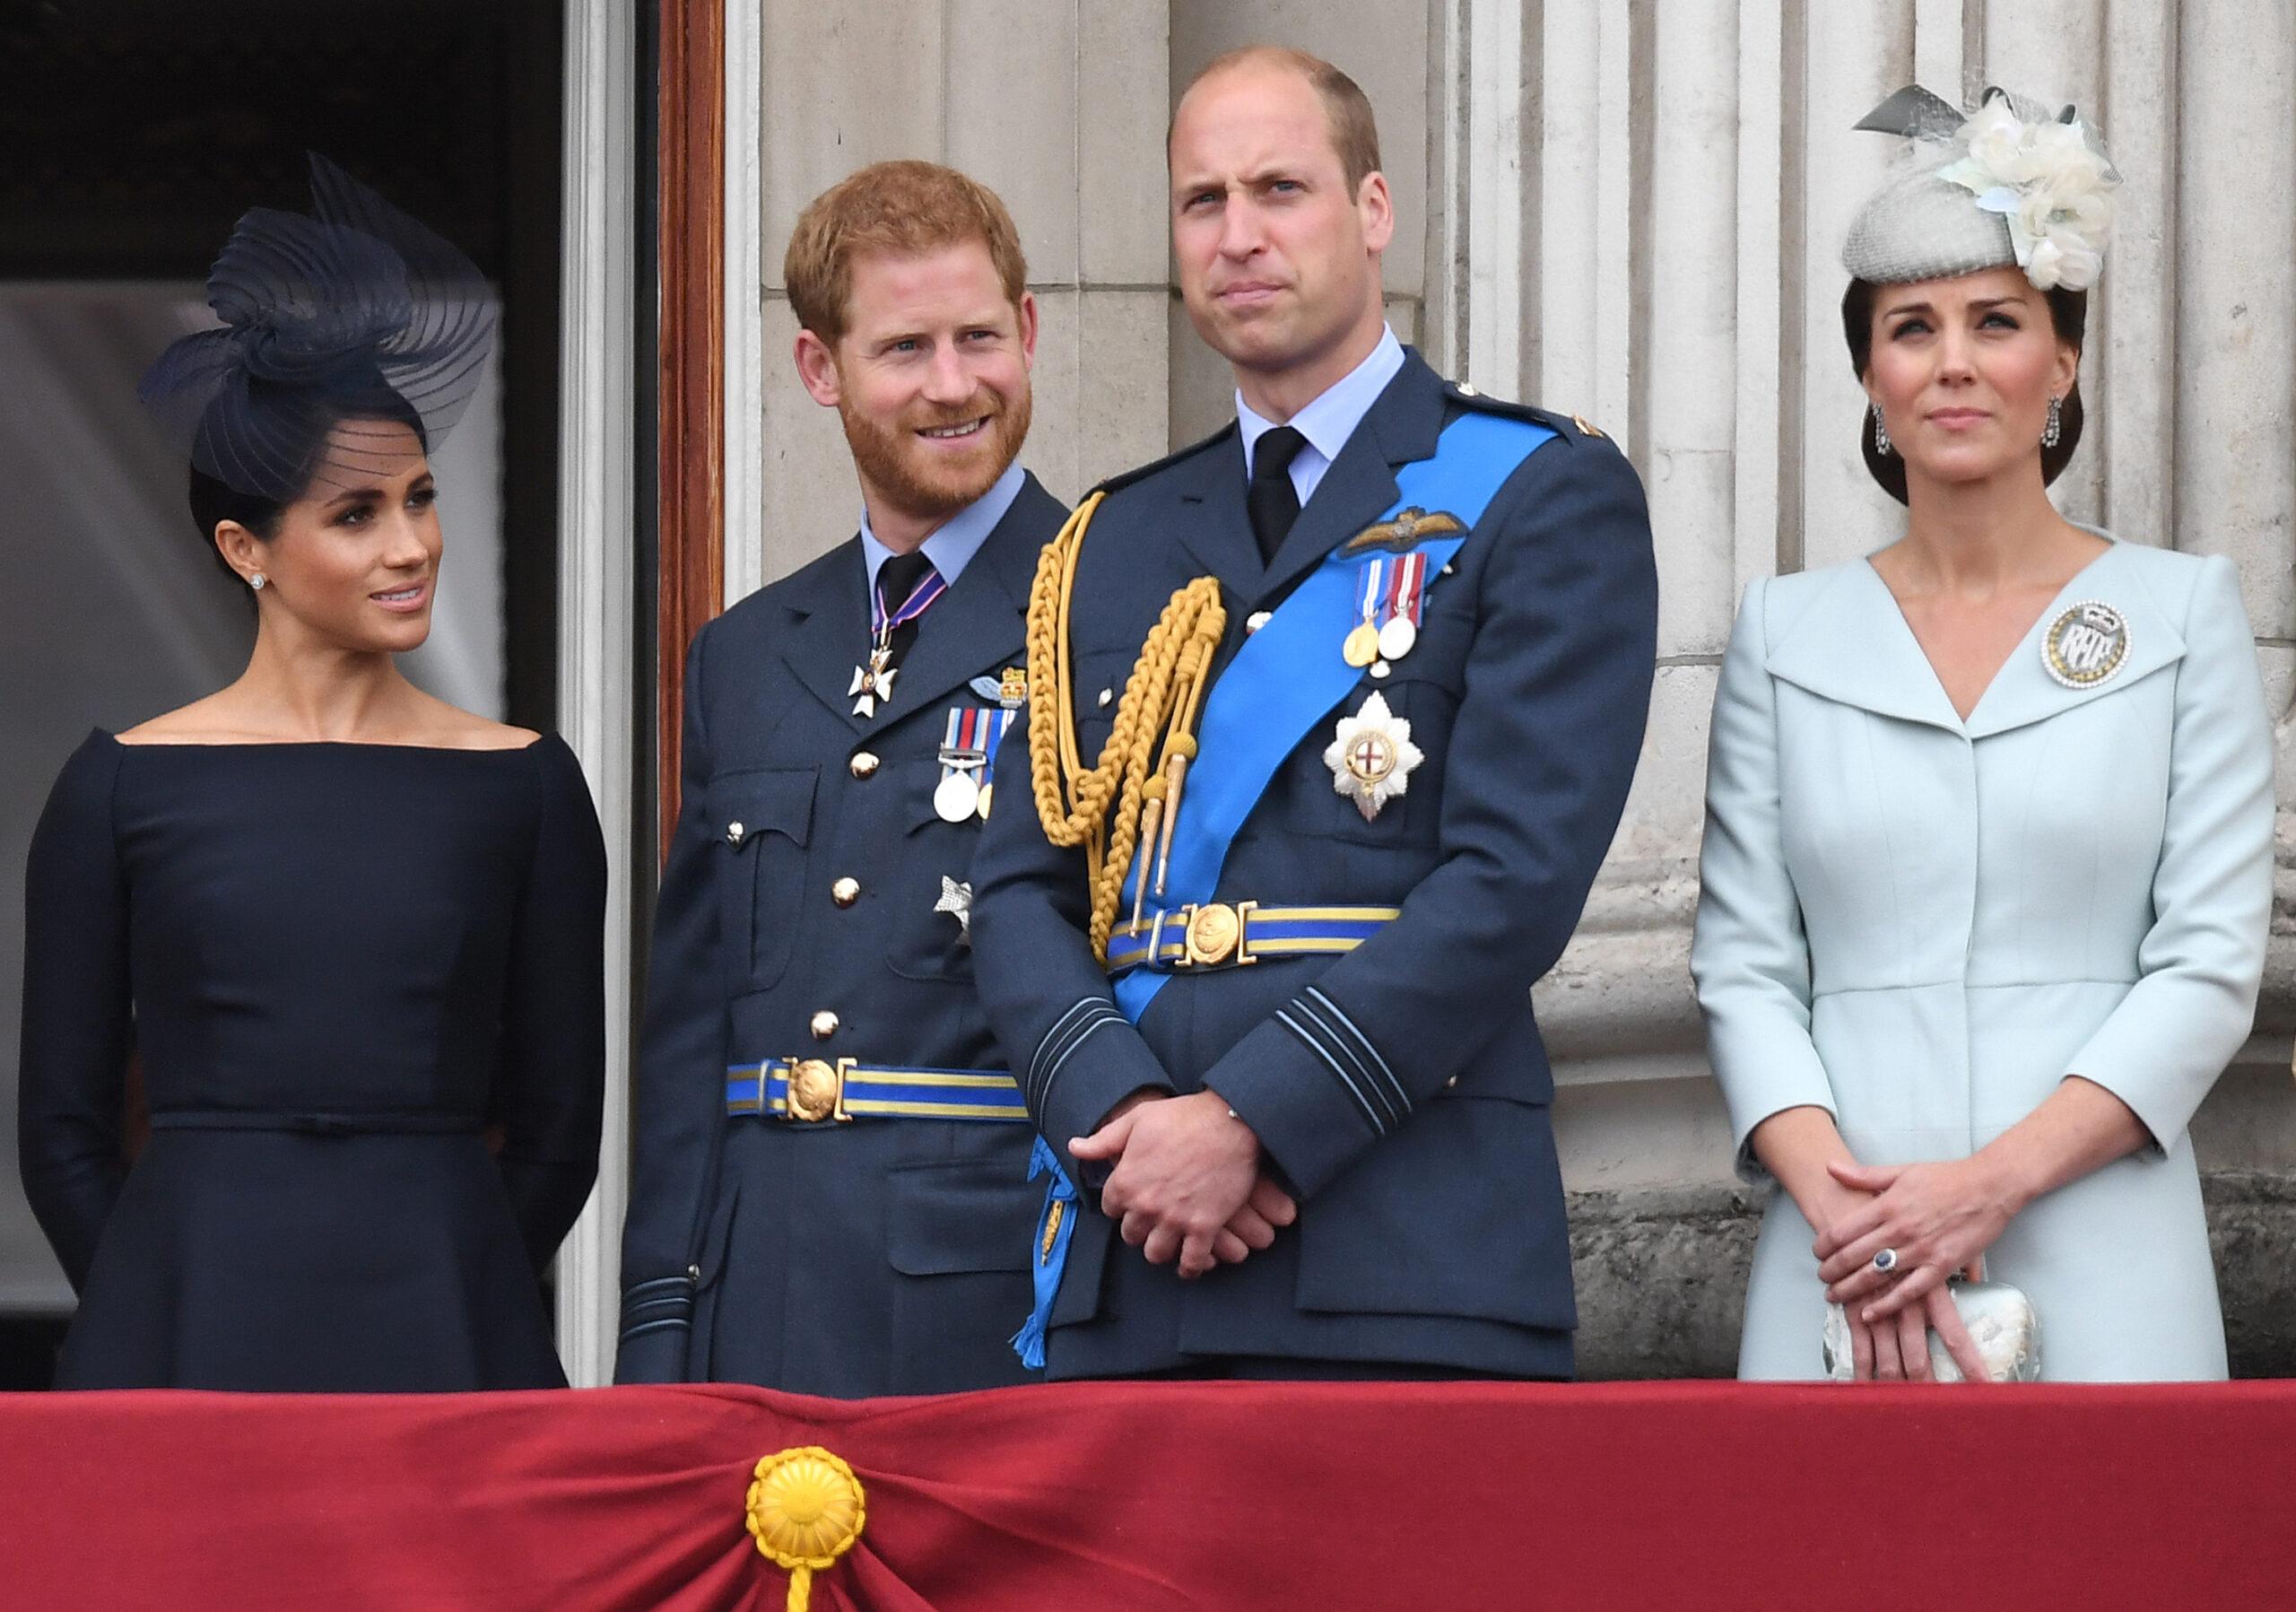 Meghan Markle, Duchess of Sussex, Prince Harry, Duke of Sussex and Duke of Cambridge attend the RAF 100 flypast at Buckingham Palace in London, England on July 10, 2018. July 10, 2018